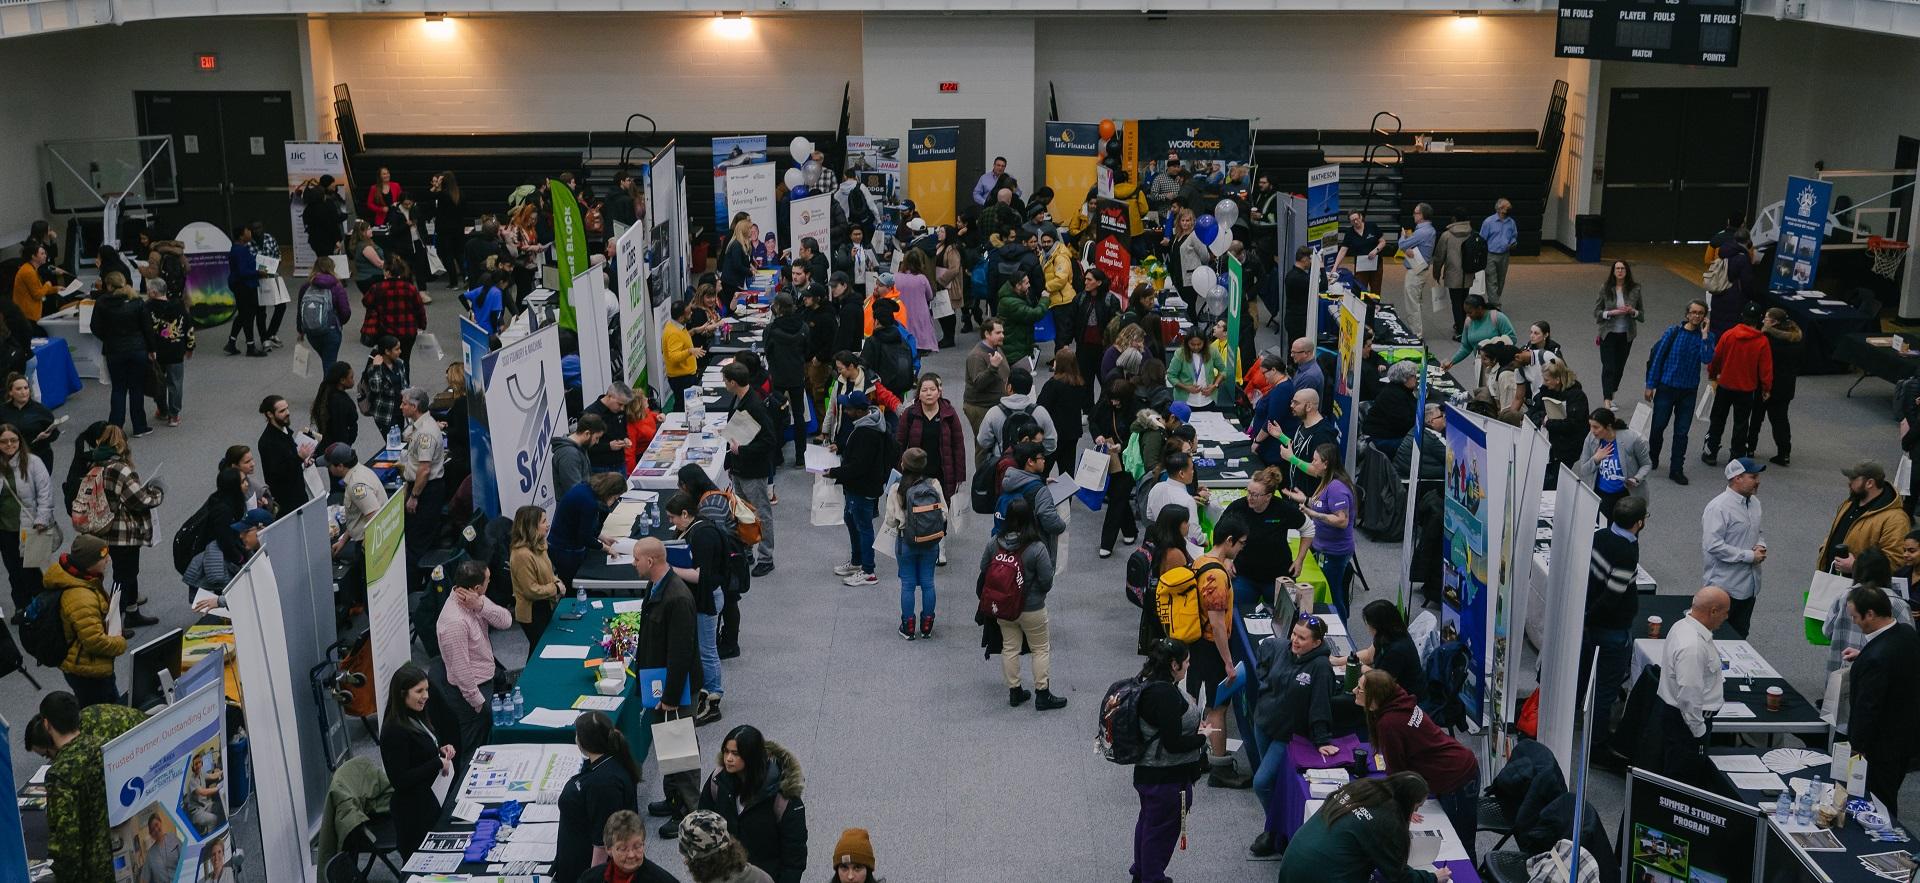 Annual Career Fair photo of employer booths and job seekers in the gym